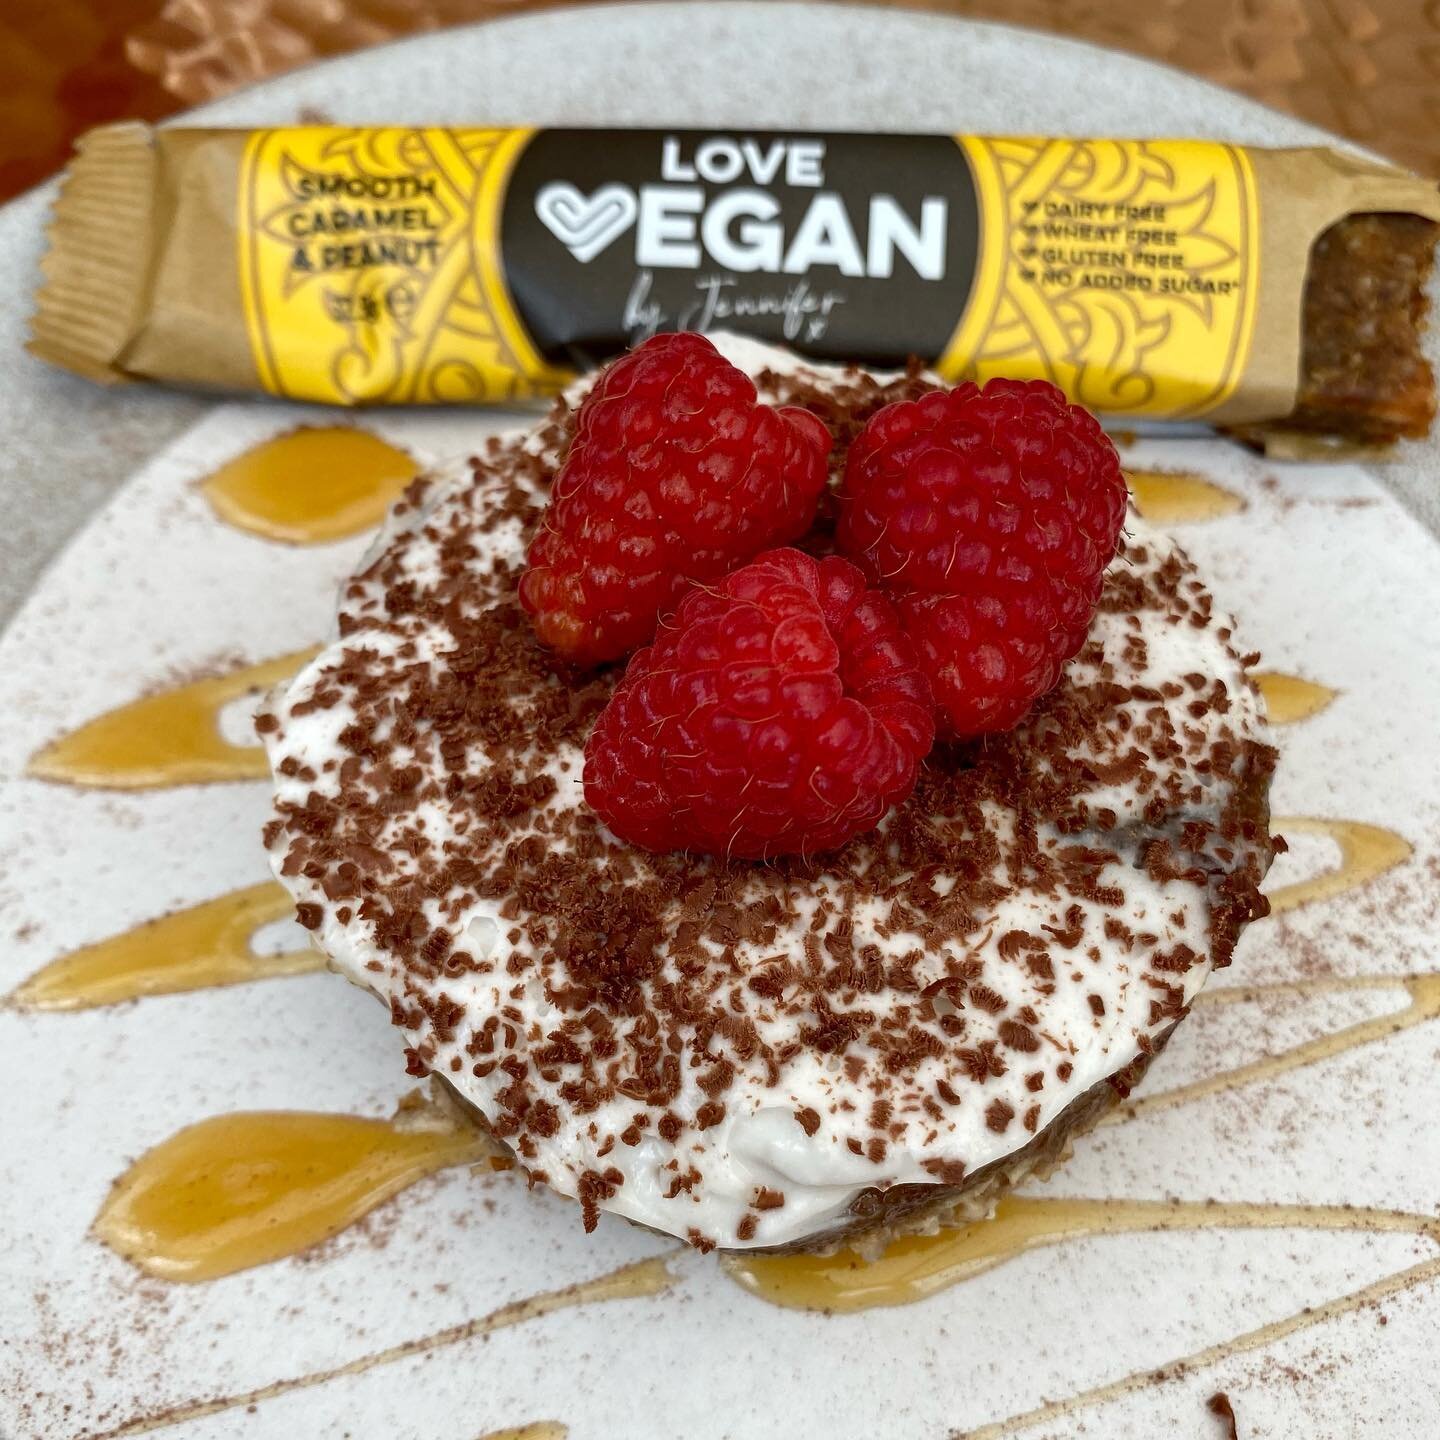 Working on making our favourite comfort pud... banoffee pie. As always this #lovevegancreation is 100% VEGAN and a big bonus is that it&rsquo;s HEALTHY too. 

It&rsquo;s been a challenge but I think I&rsquo;ve cracked it this time! This gorgeous bano